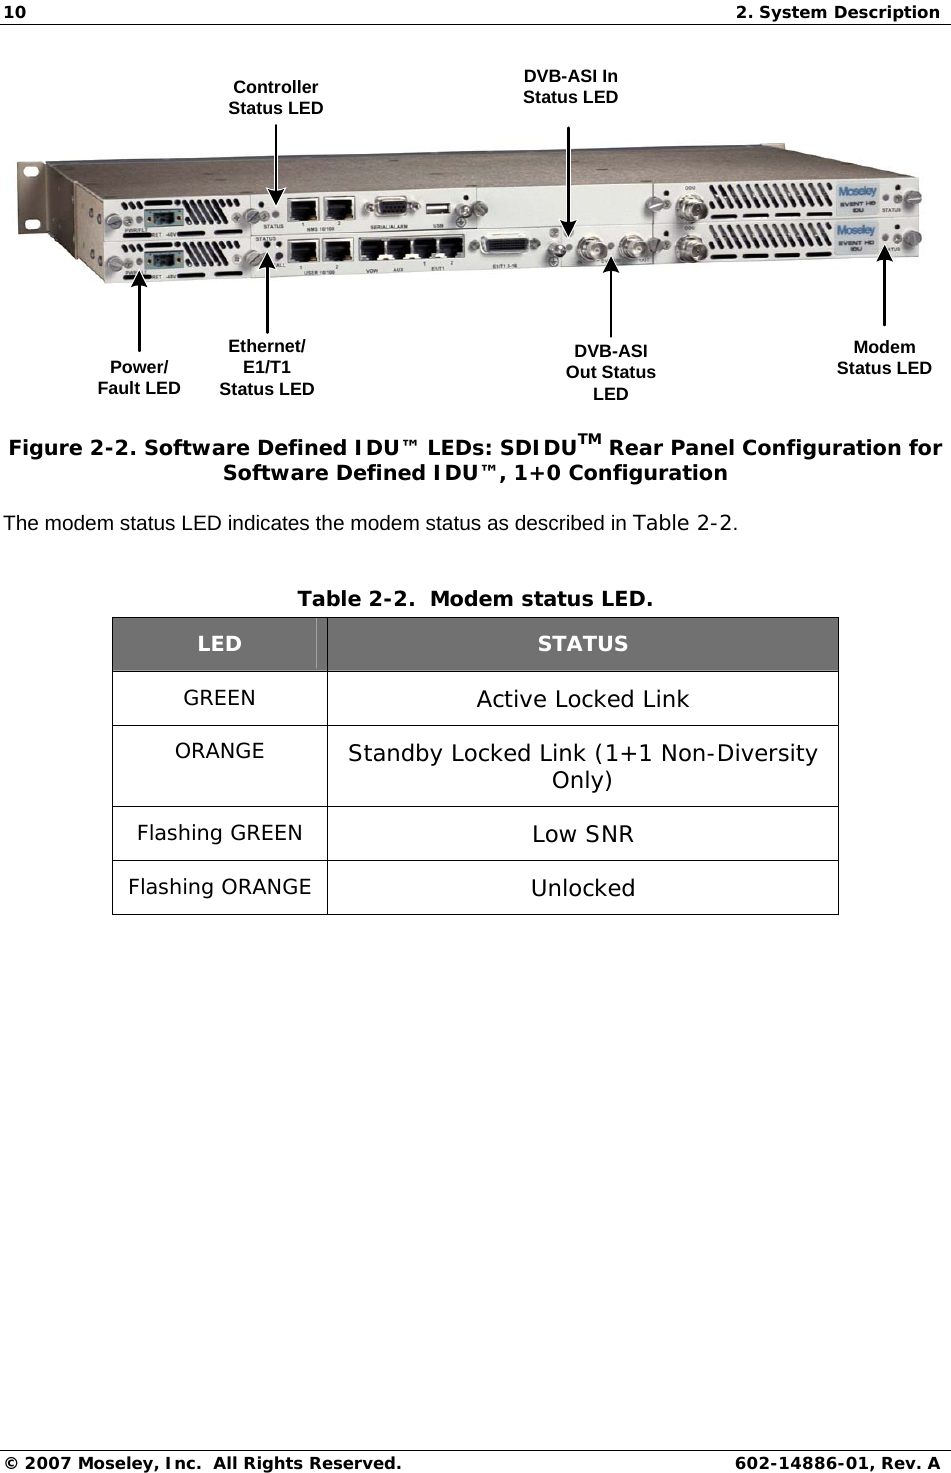 10  2. System Description © 2007 Moseley, Inc.  All Rights Reserved.  602-14886-01, Rev. A Controller Status LEDPower/Fault LEDEthernet/E1/T1 Status LEDDVB-ASI Out Status LEDDVB-ASI In Status LEDModem Status LED Figure 2-2. Software Defined IDU™ LEDs: SDIDUTM Rear Panel Configuration for Software Defined IDU™, 1+0 Configuration The modem status LED indicates the modem status as described in Table 2-2. Table 2-2.  Modem status LED. LED  STATUS GREEN  Active Locked Link ORANGE  Standby Locked Link (1+1 Non-Diversity Only) Flashing GREEN  Low SNR Flashing ORANGE  Unlocked  